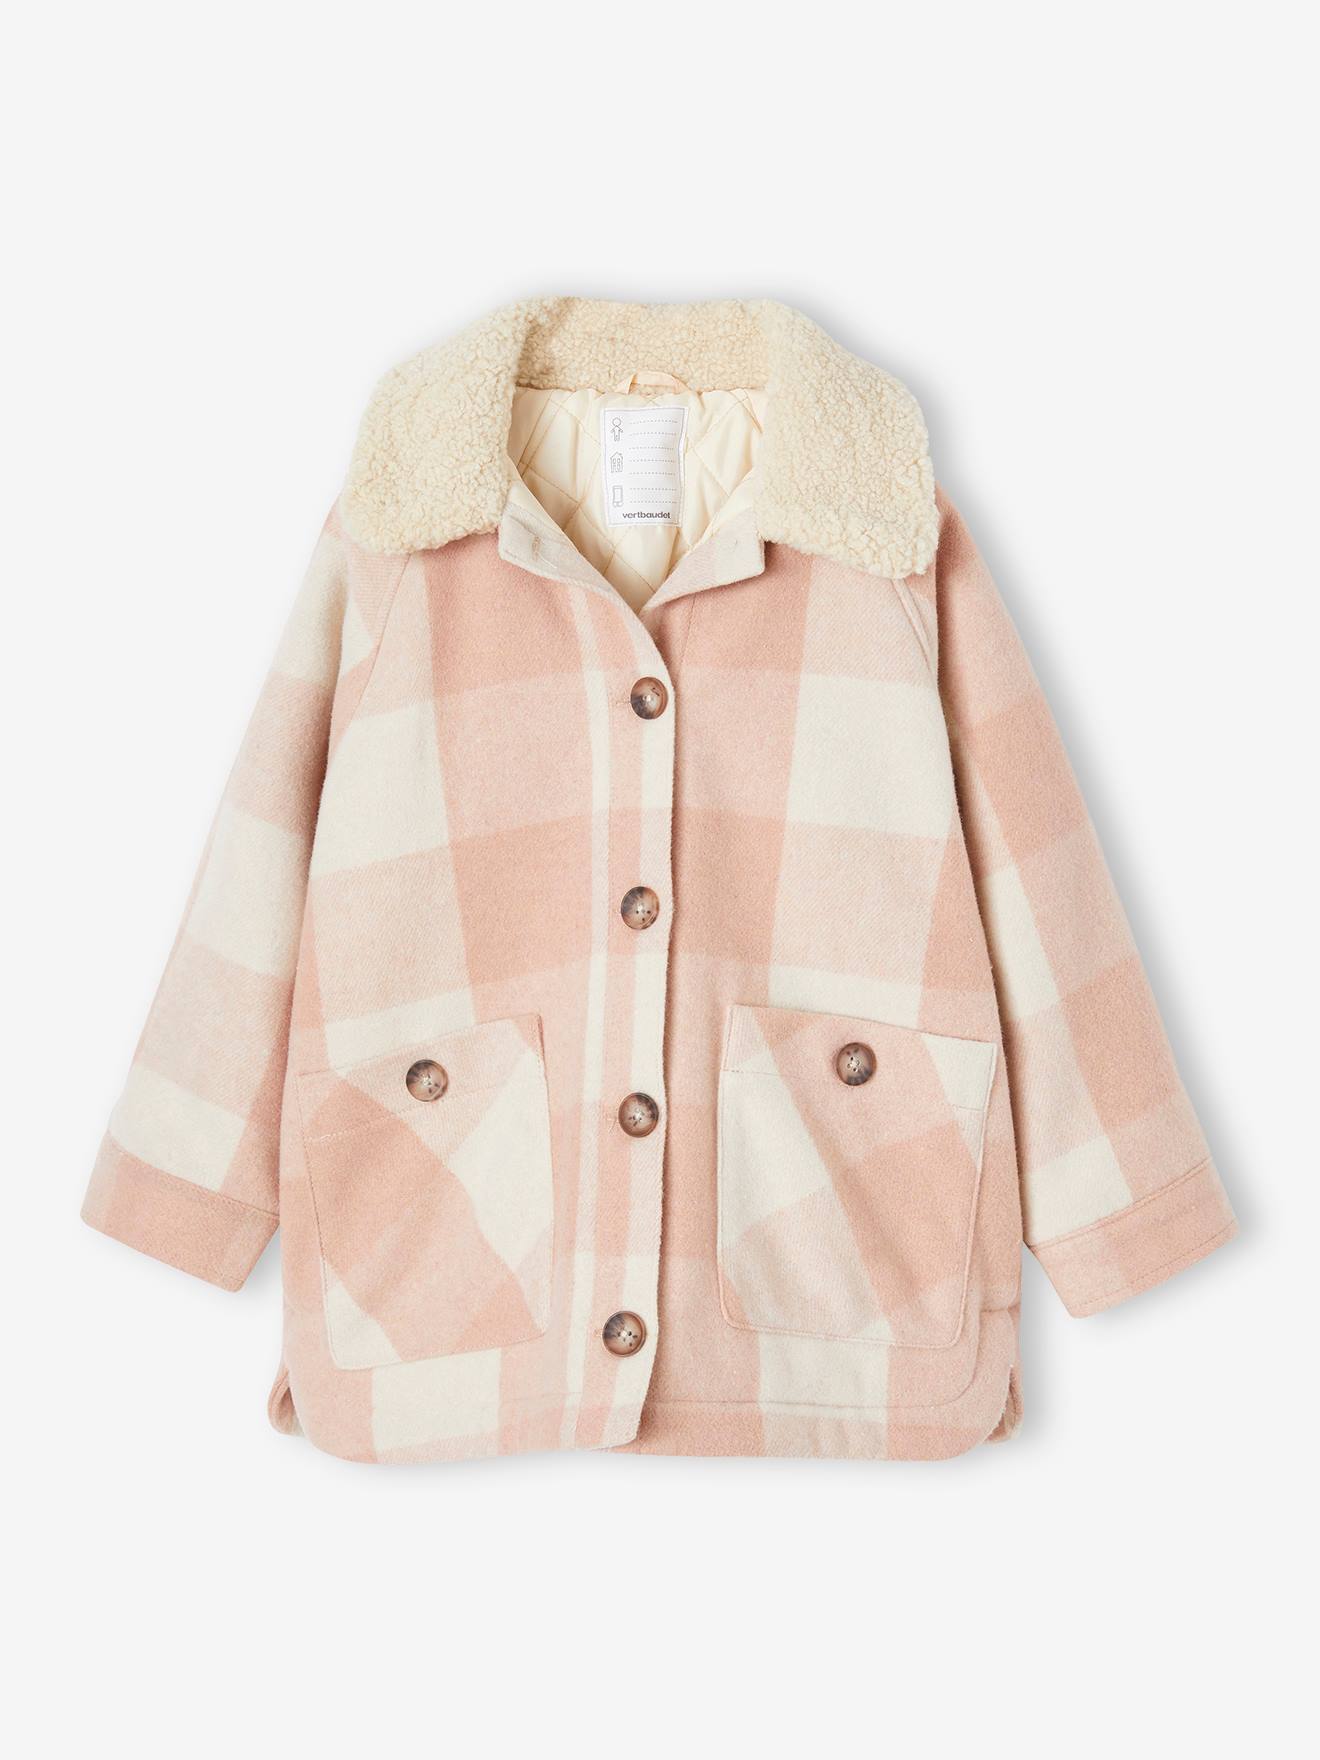 Shacket-Style Coat in Chequered Wool for Girls chequered pink